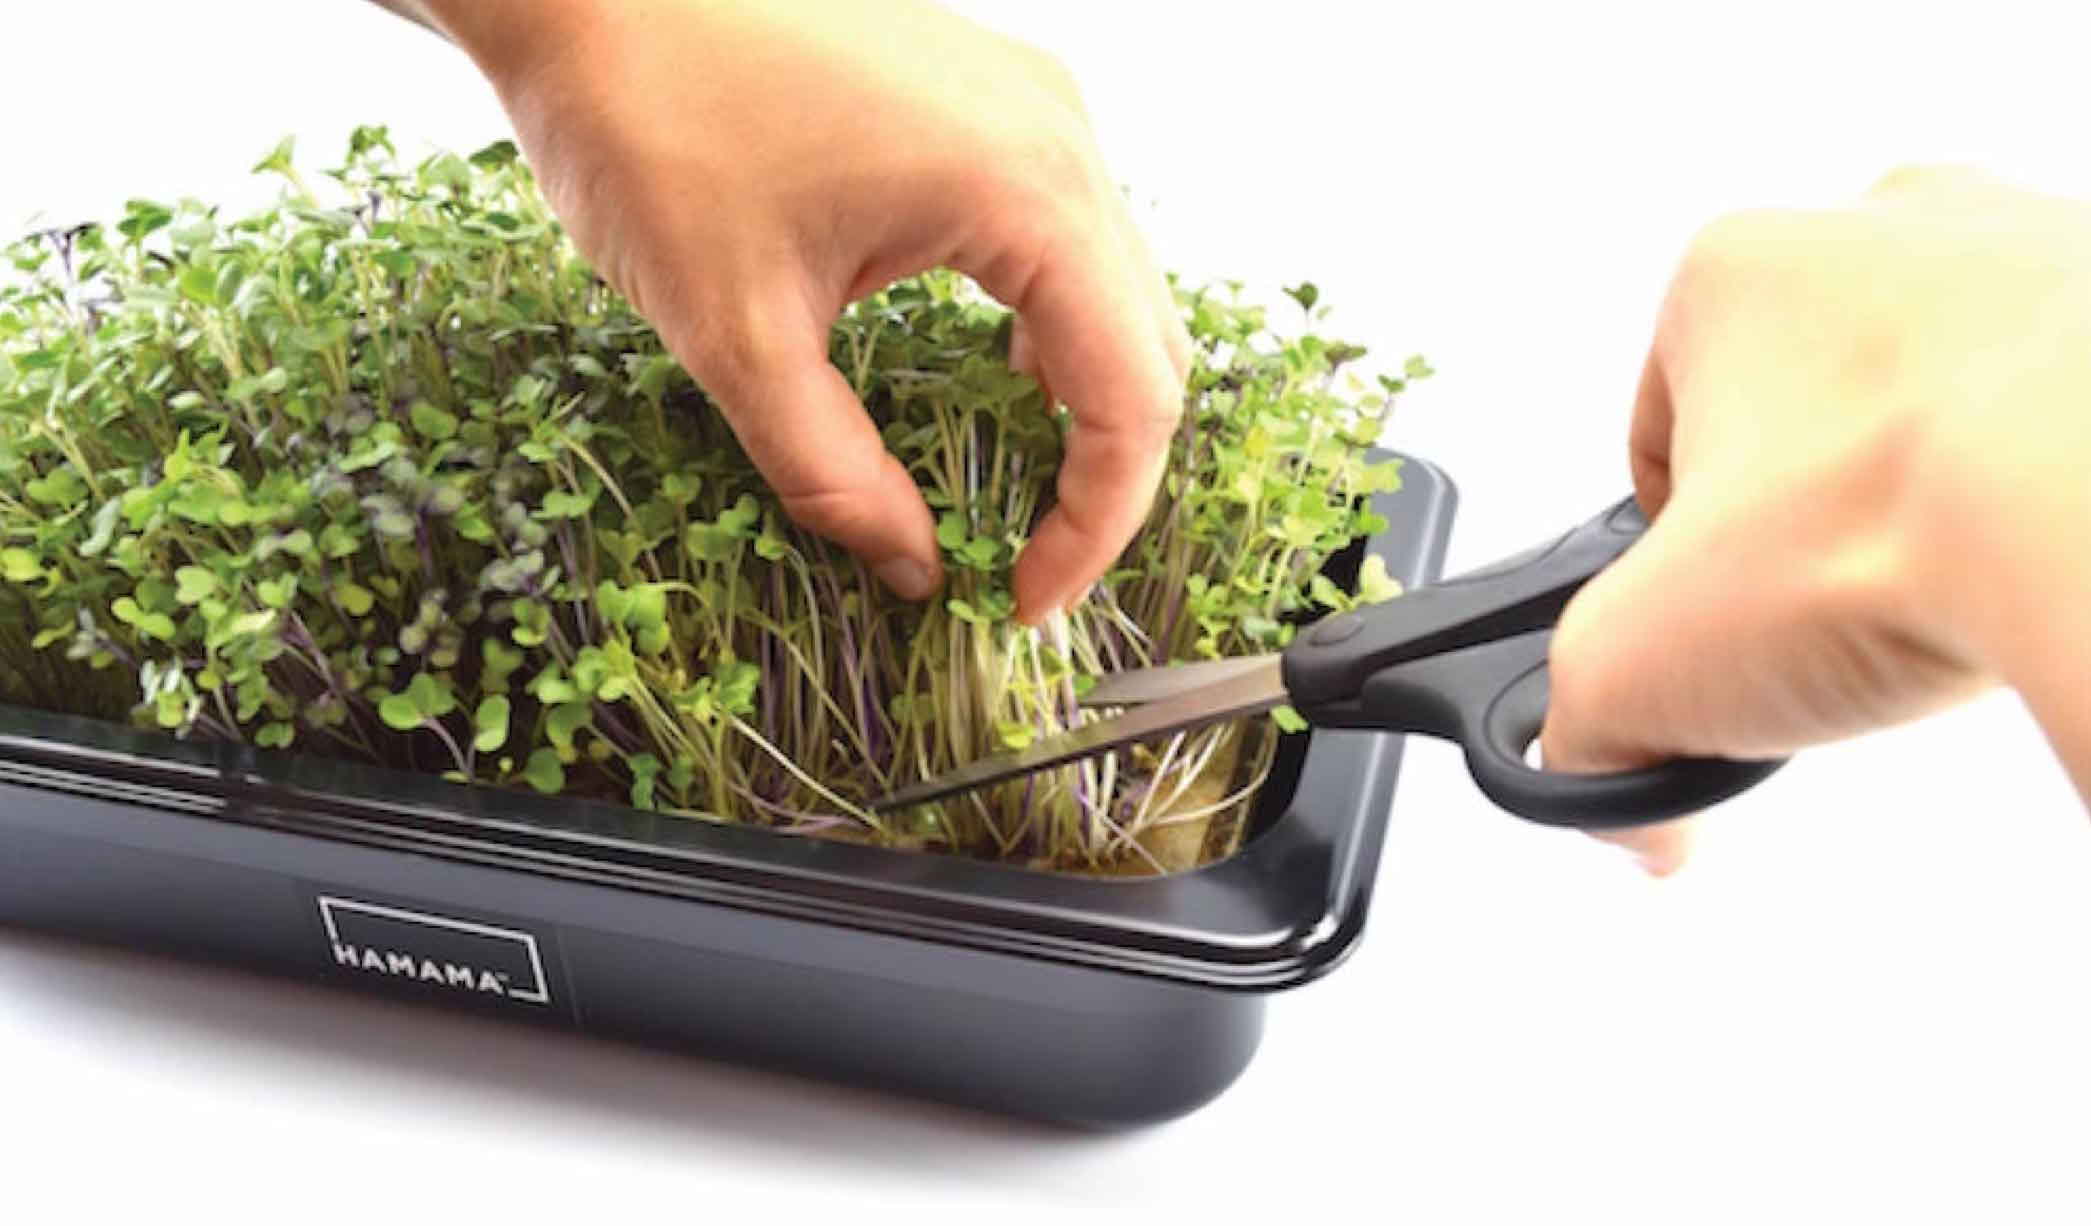 Steps for growing microgreens and micro herbs in a microgreen kit. Harvest fully grown microgreens and micro herbs.